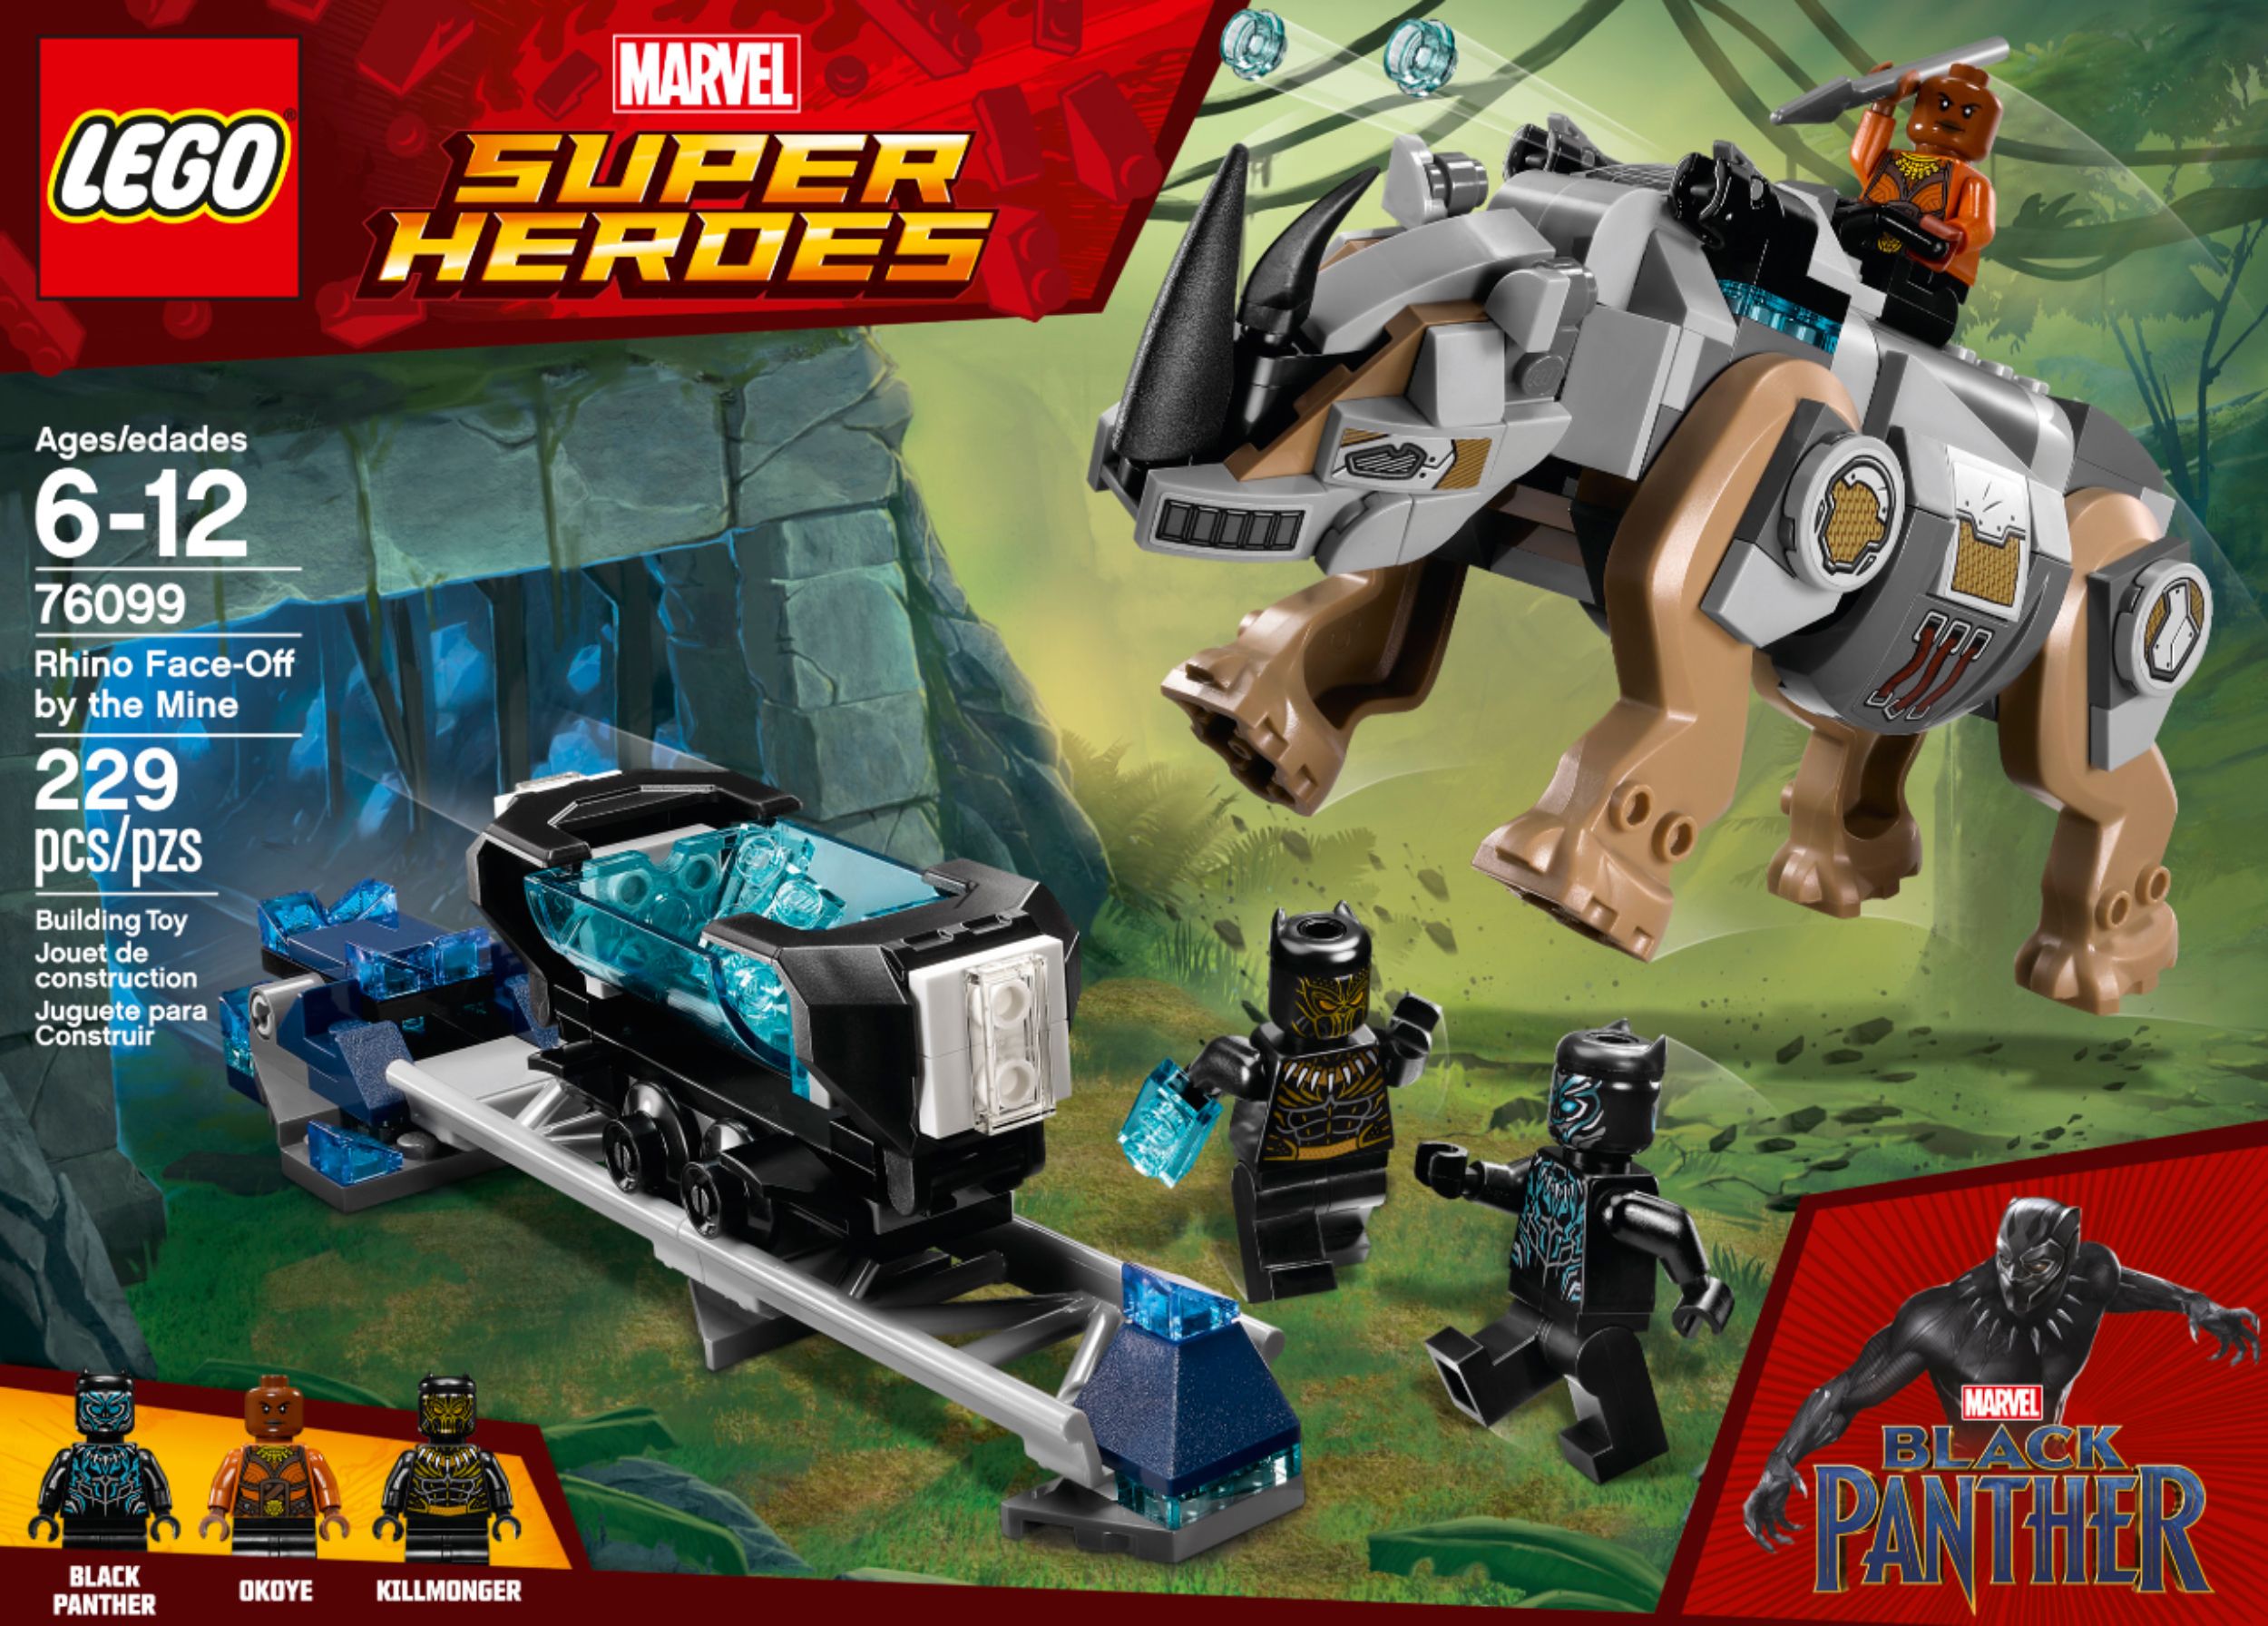 LEGO Marvel 76099 Rhino Face-Off by the Mine Black Panther New in Box 